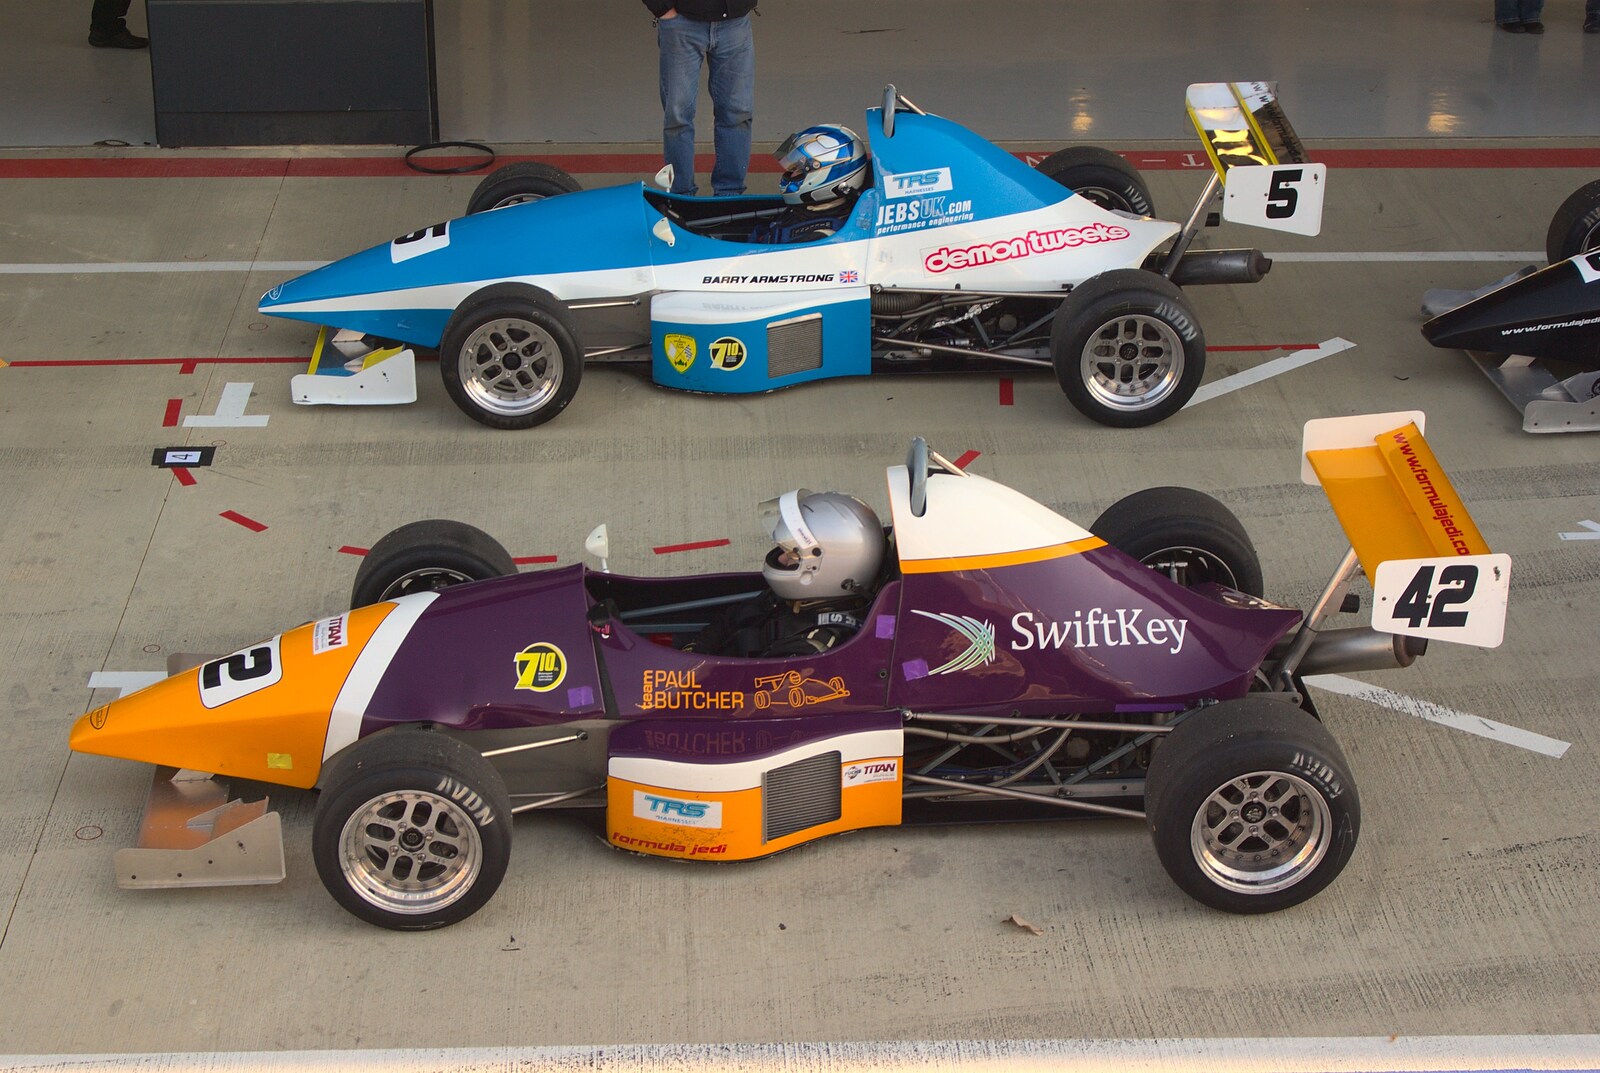 The SwiftKey racing car from TouchType at Silverstone, Northamptonshire - 22nd October 2011